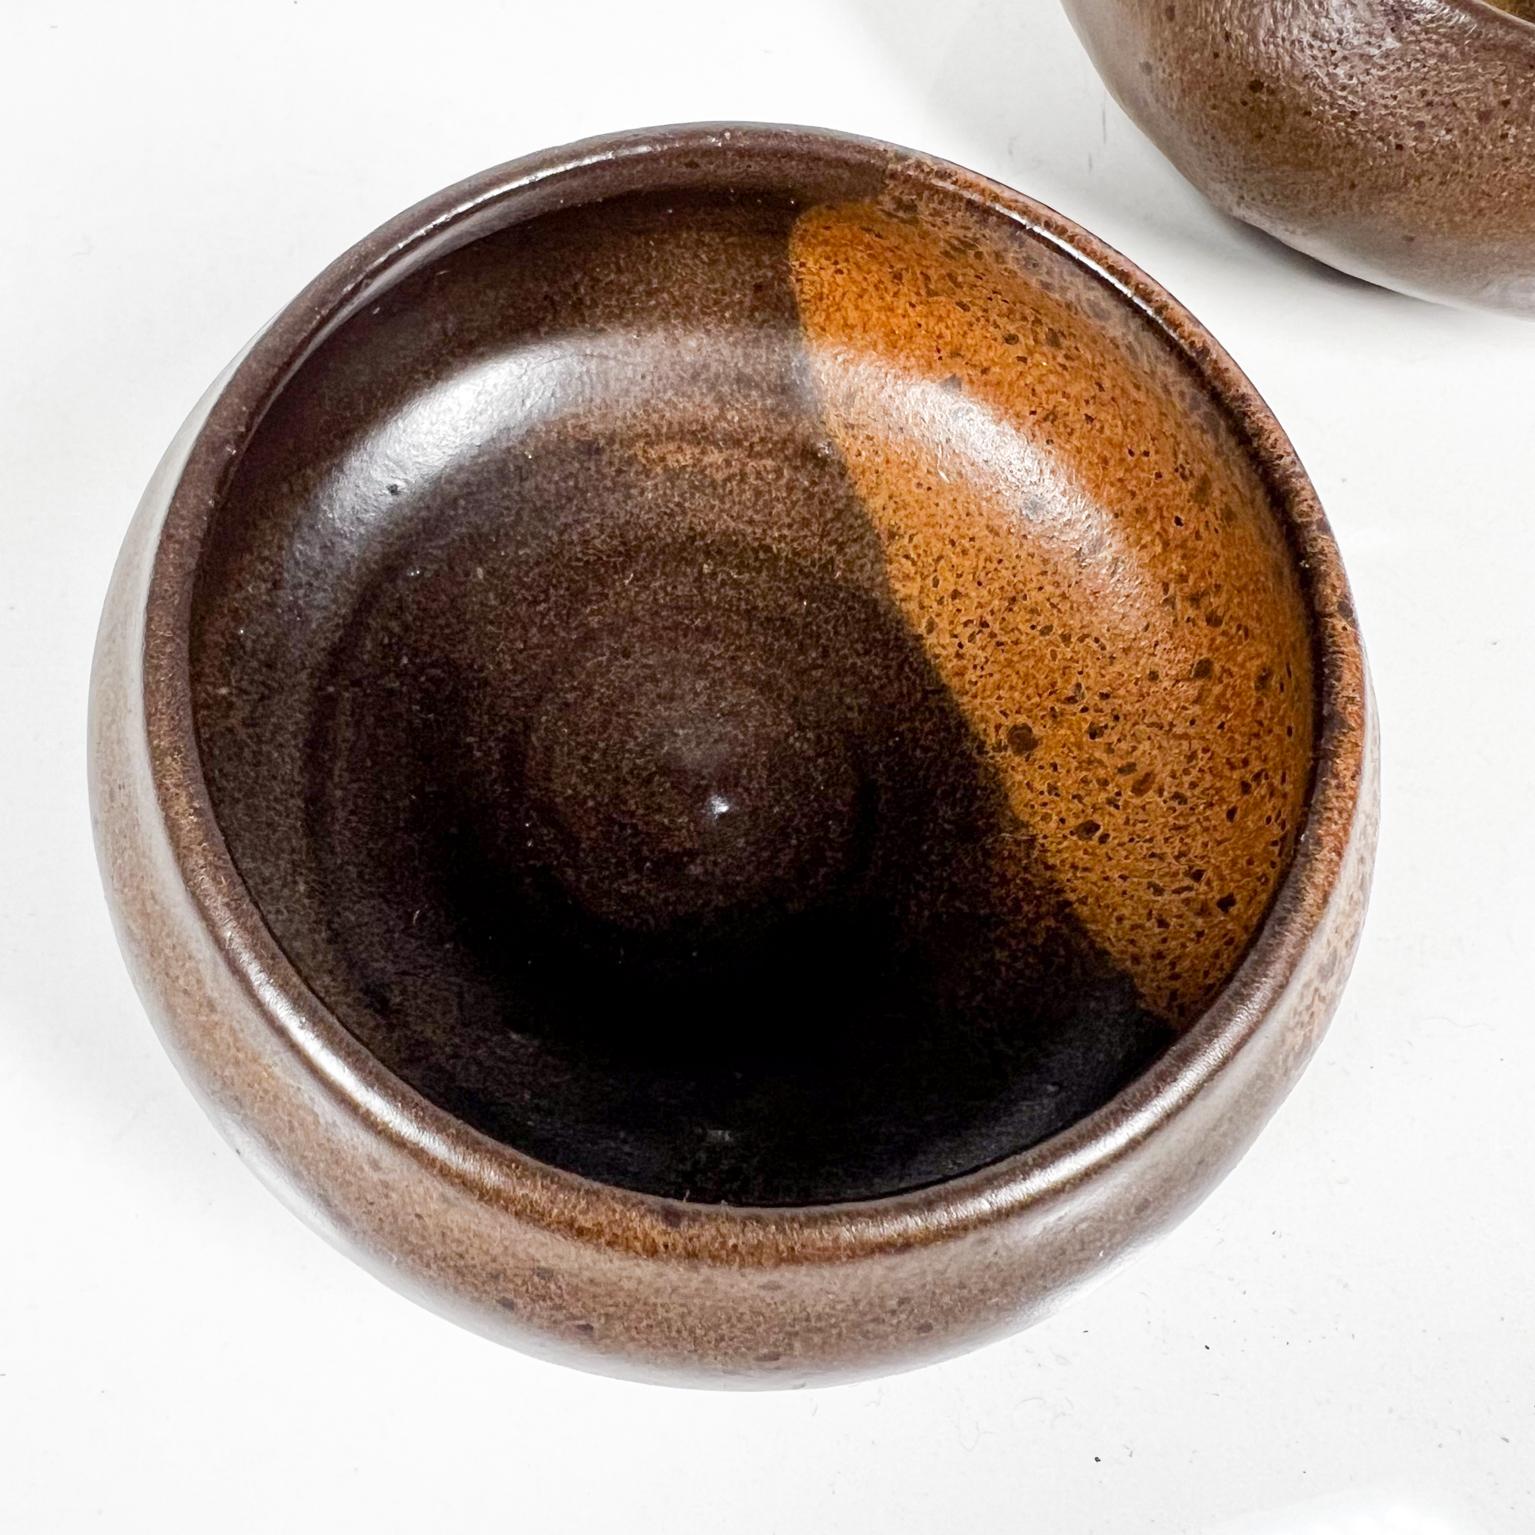 1960s Jean Balmer Studio Art Pottery Modern Two-tone Speckled Bowls
Two-tone design
Artist signed
4 diameter x 1.88 h
Original vintage condition
Please review all images